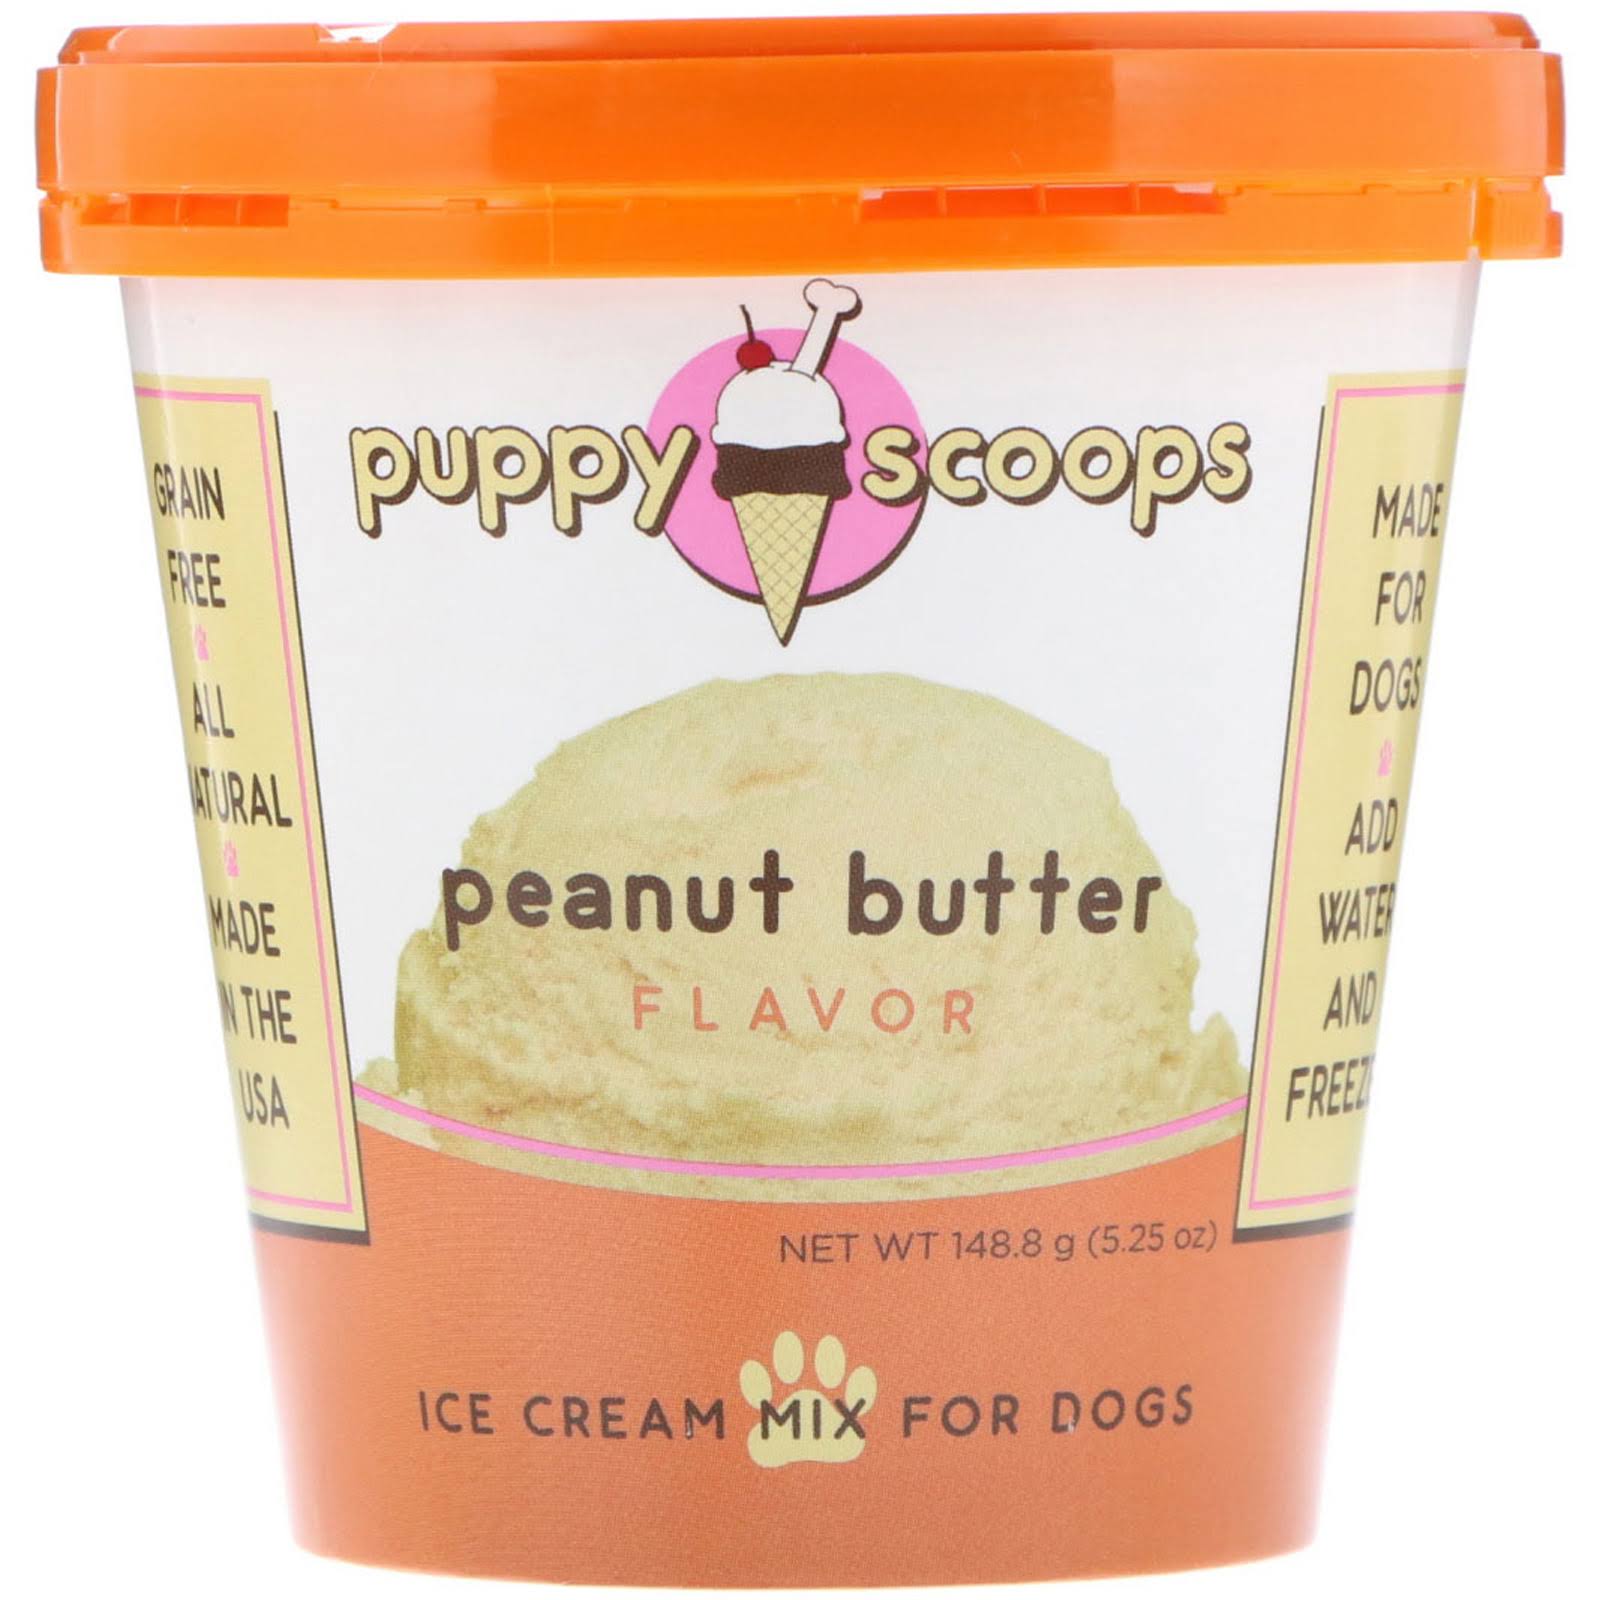 Puppy Scoops Ice Cream Mix for Dogs and Puppies - Peanut Butter Flavor